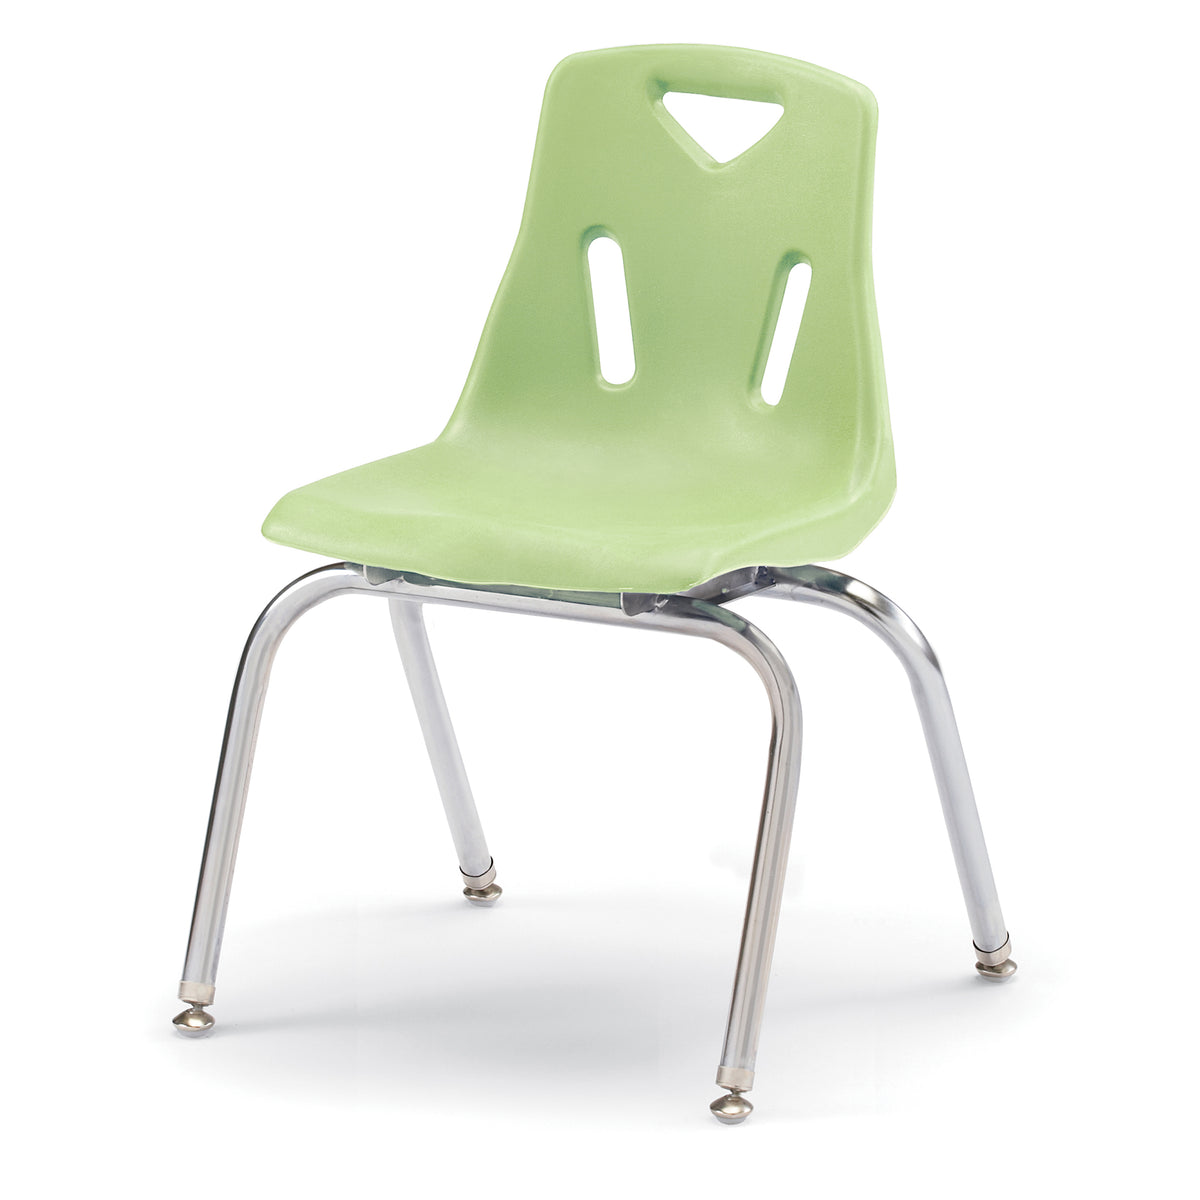 8146JC1130, Berries Stacking Chair with Chrome-Plated Legs - 16" Ht - Key Lime